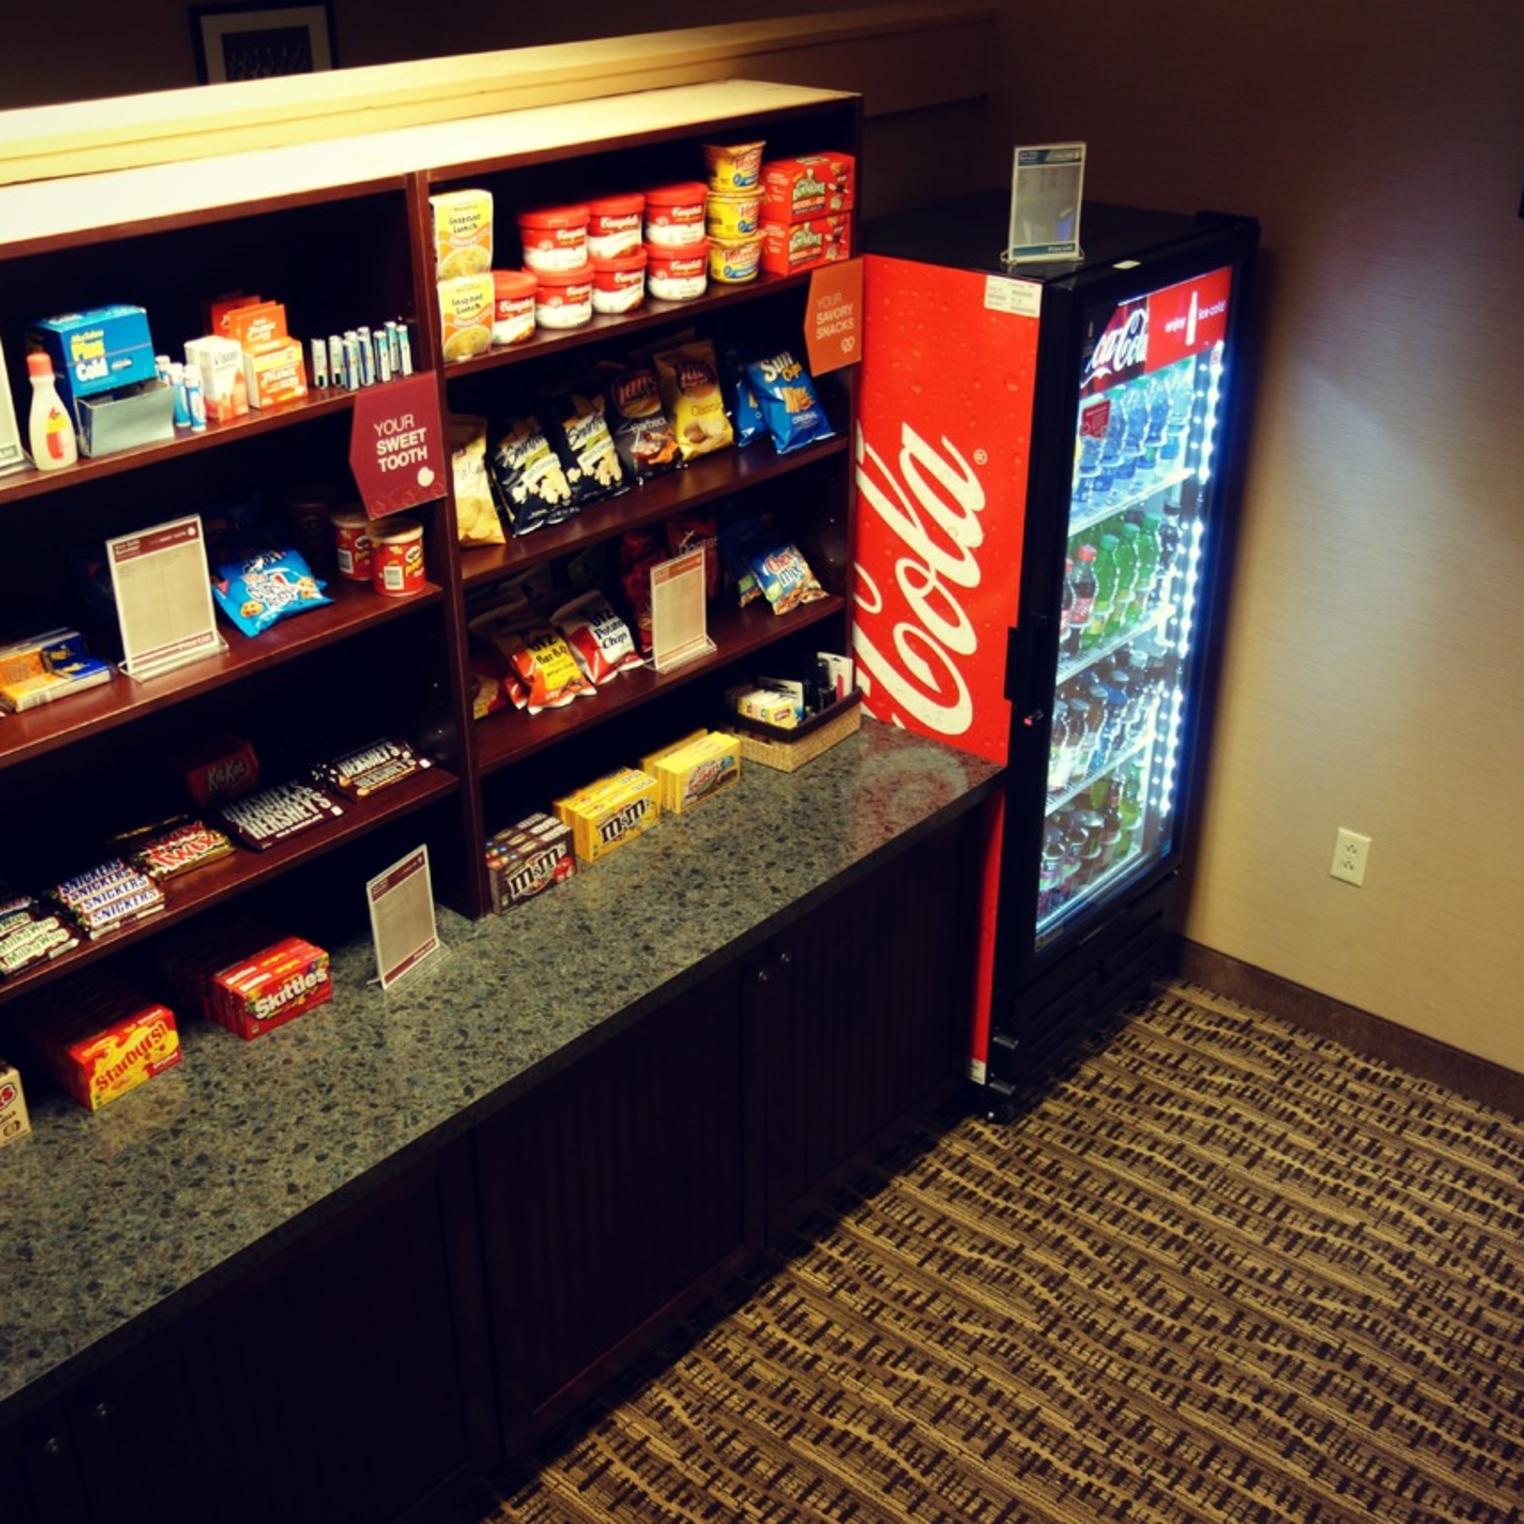 Our sundry shop has the essentials and a variety of snacks and beverages.